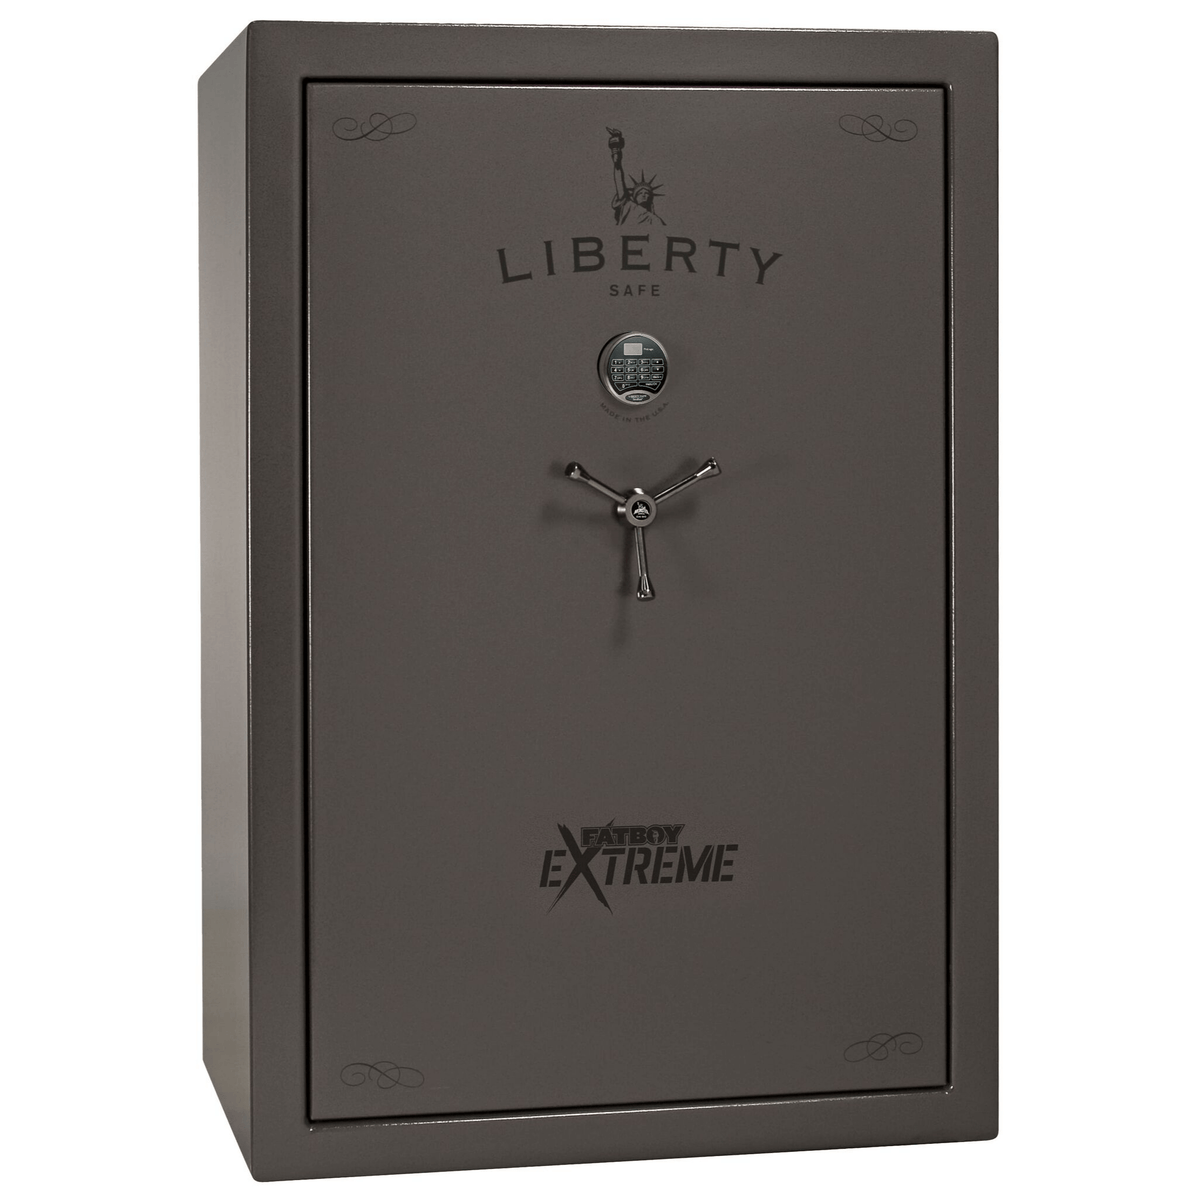 Lincoln Fatboy Extreme 64XT Safe in Gray Marble with Black Chrome Electronic Lock.